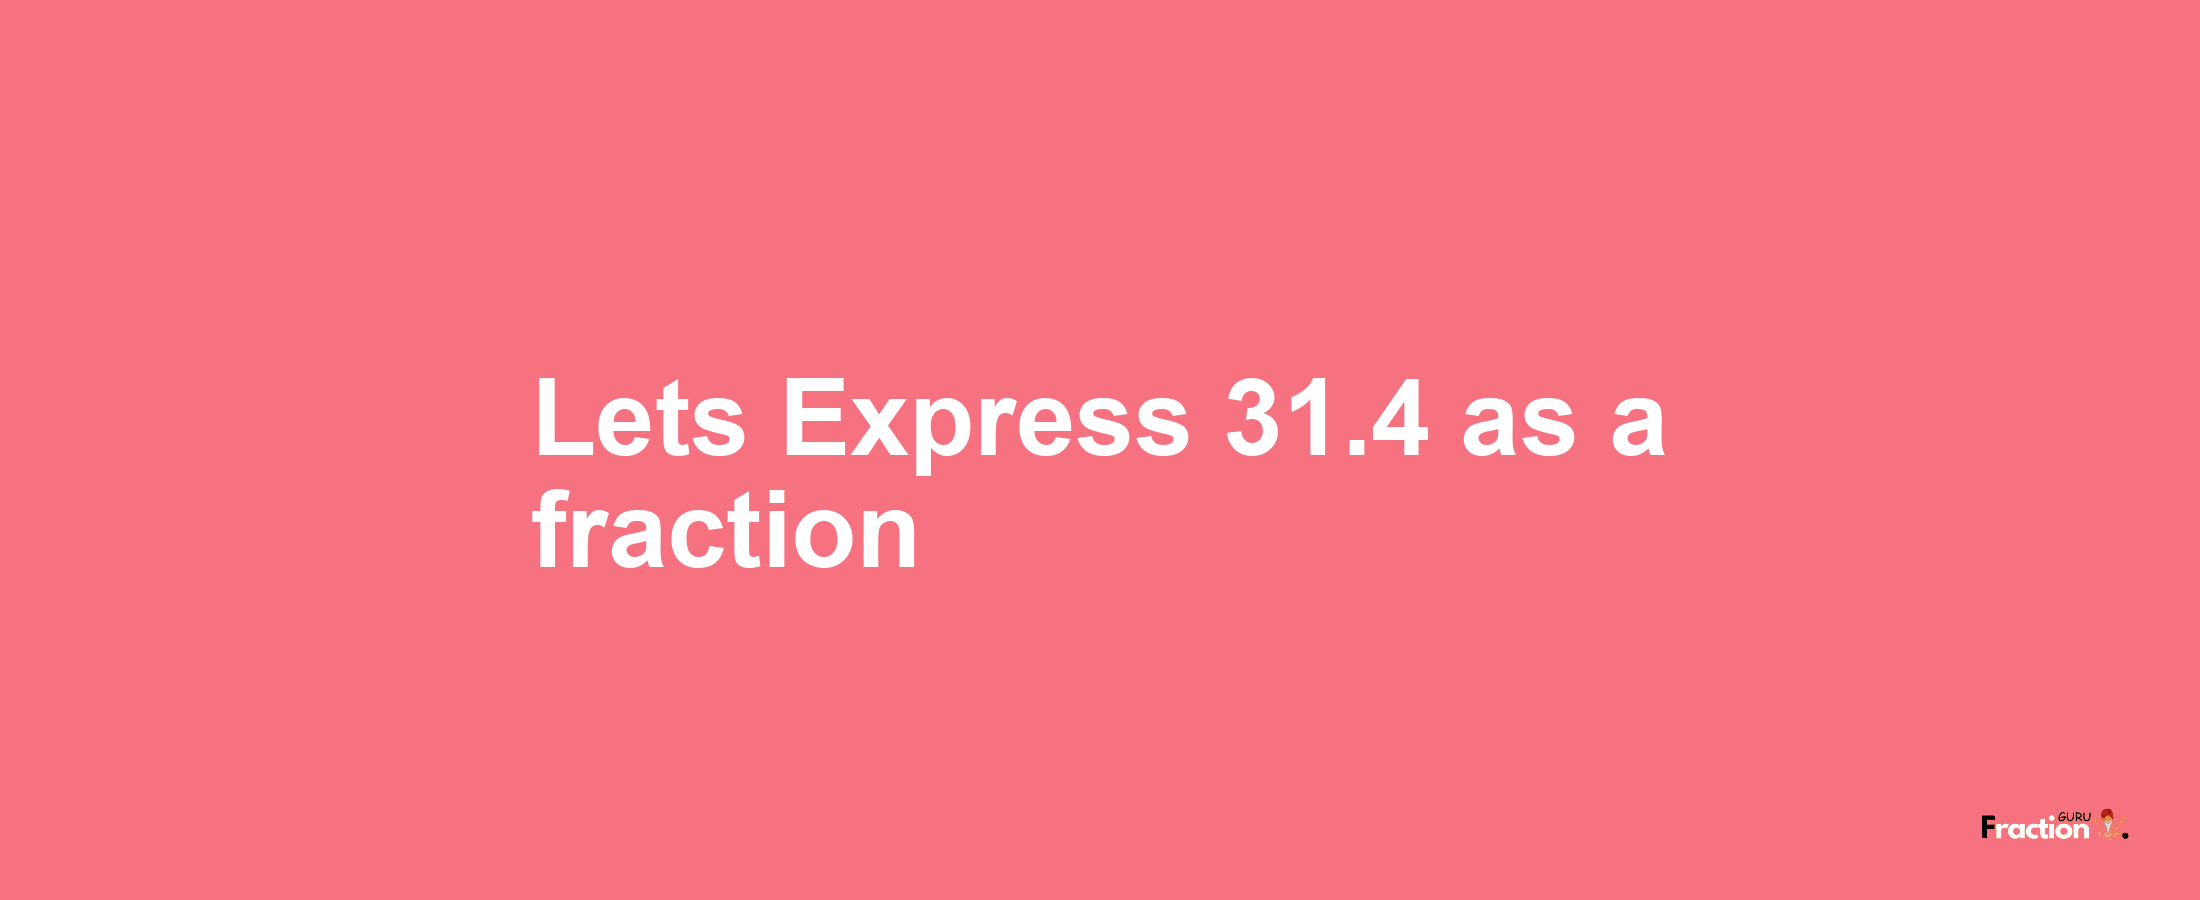 Lets Express 31.4 as afraction